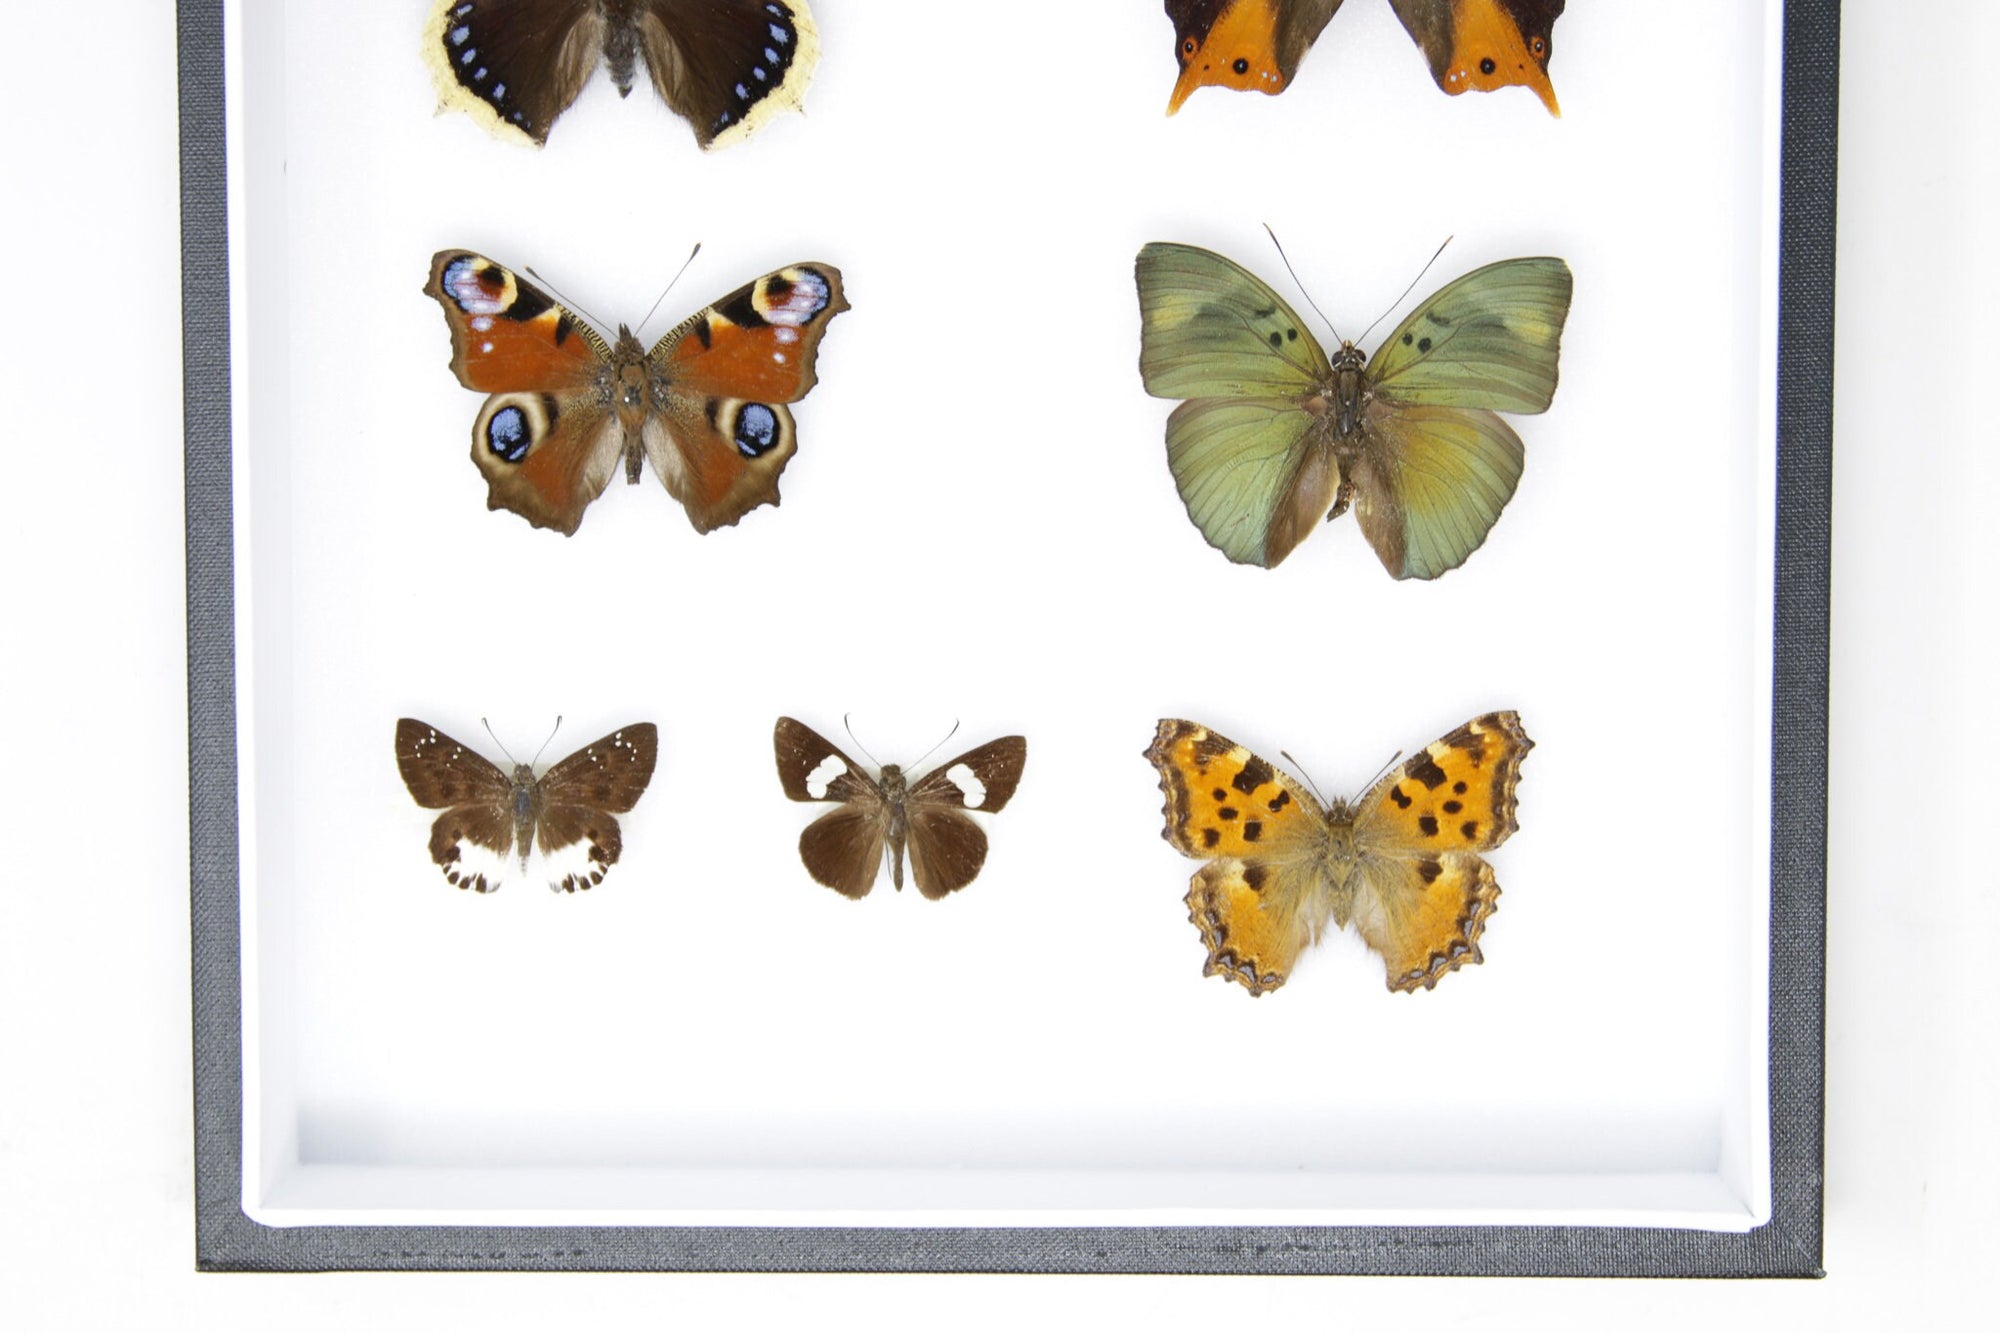 Vintage Butterfly Collection in Excellent Condition, Pinned Lepidoptera Specimens with Labels, A1 condition, 12x9x2 inch